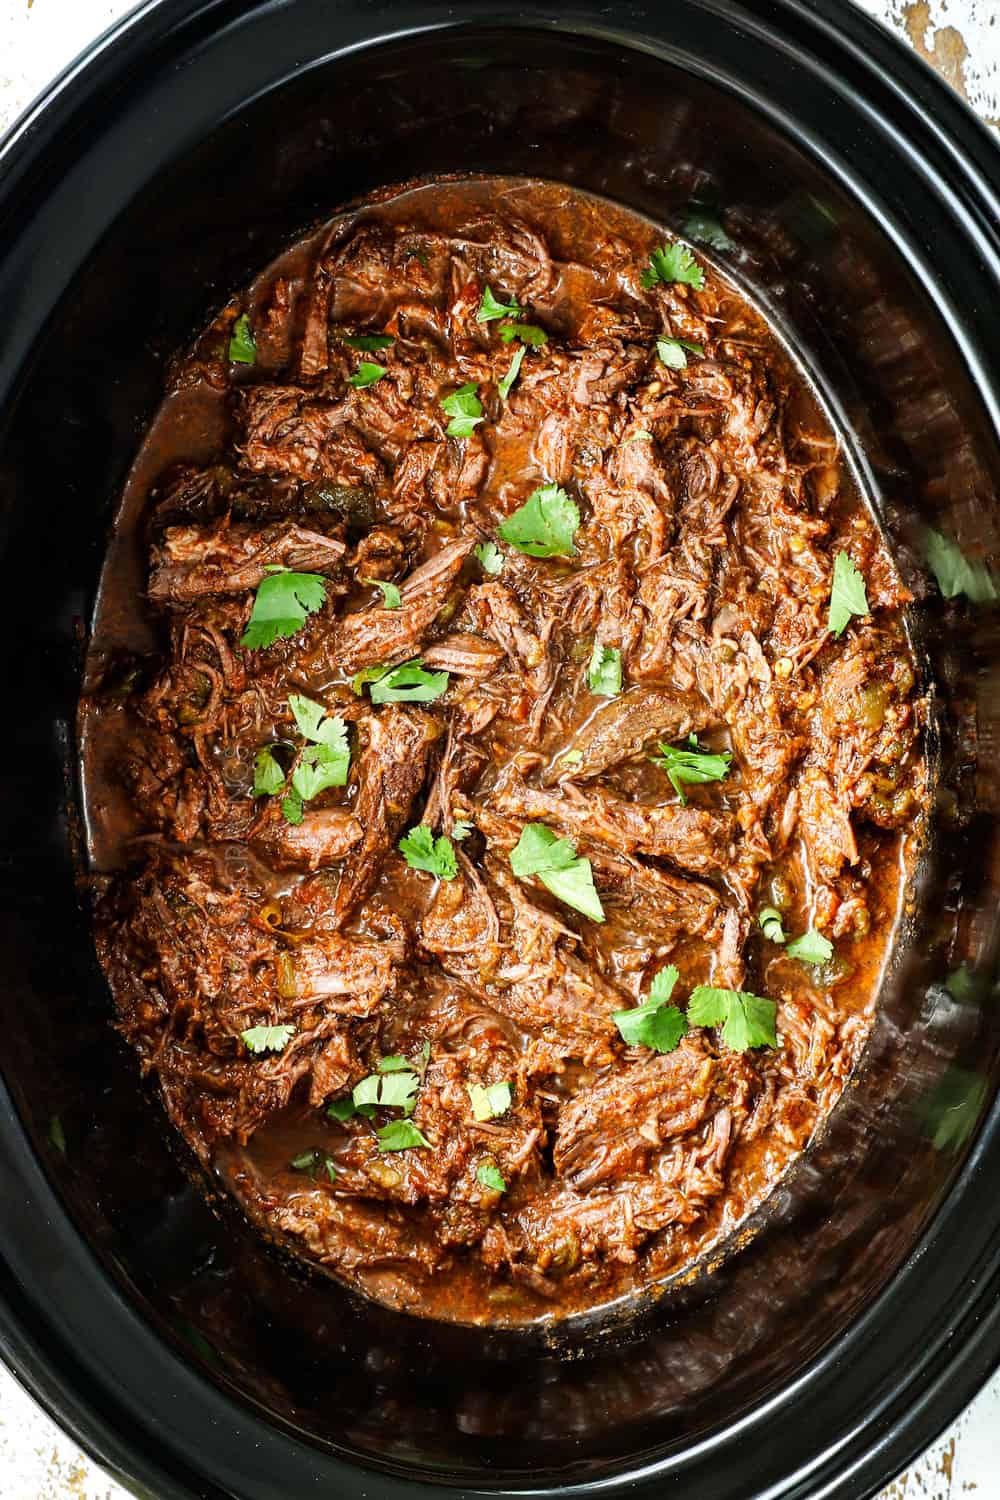 showing how to make shredded beef tacos by cooking the beef until fall apart tender in the crockpot